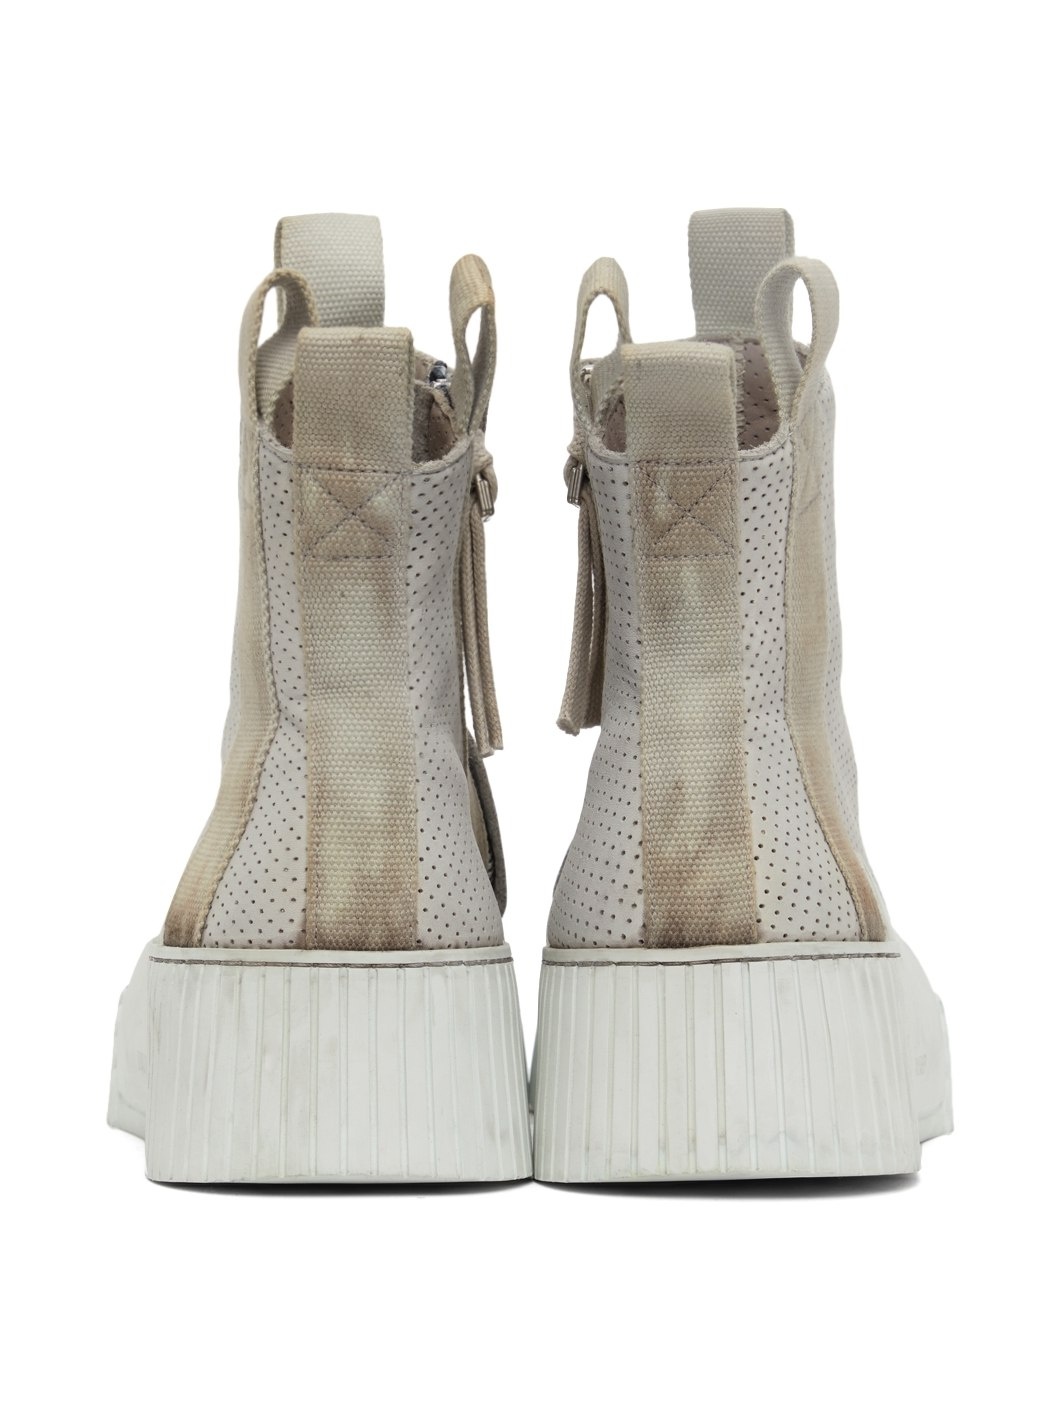 Off-White Bamba 3.1 High Top Sneakers - 4